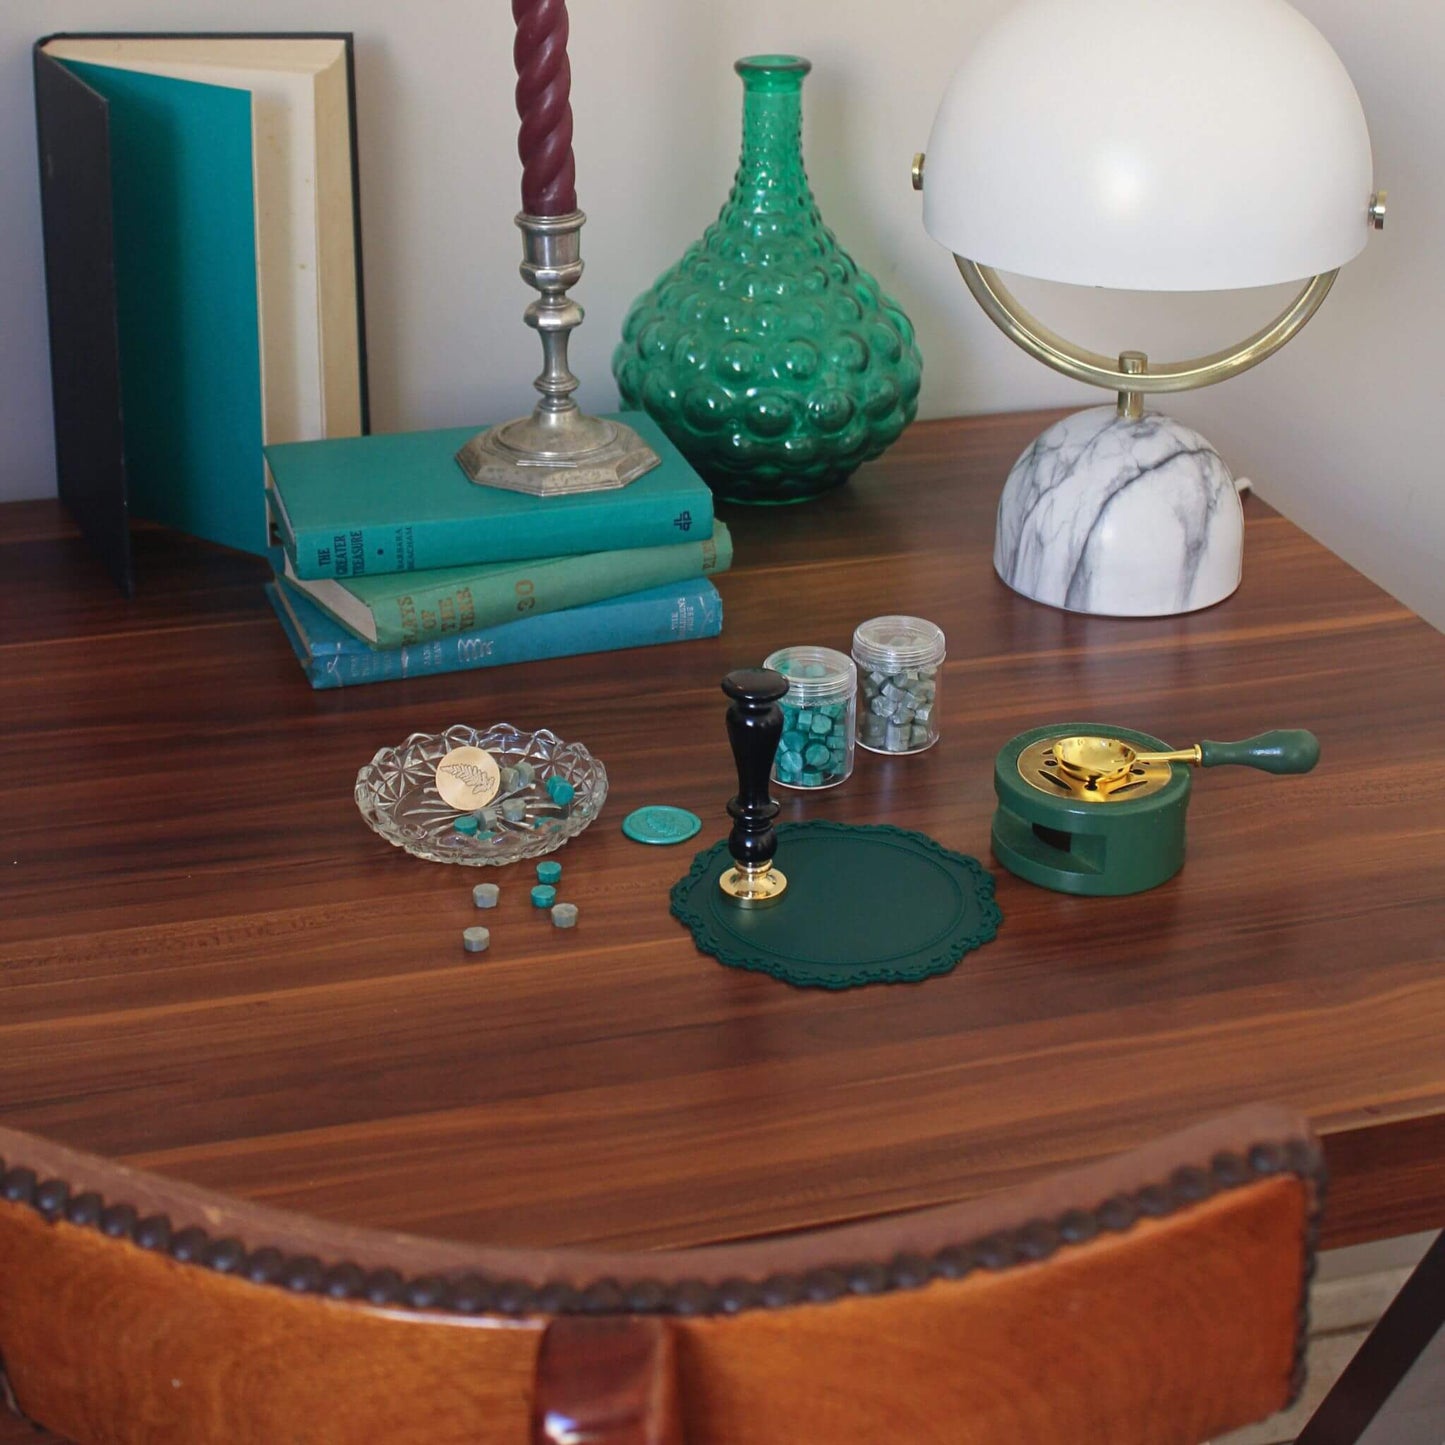 green lovers wax sealing kit laid out on wooden desk with vintage books and lamp